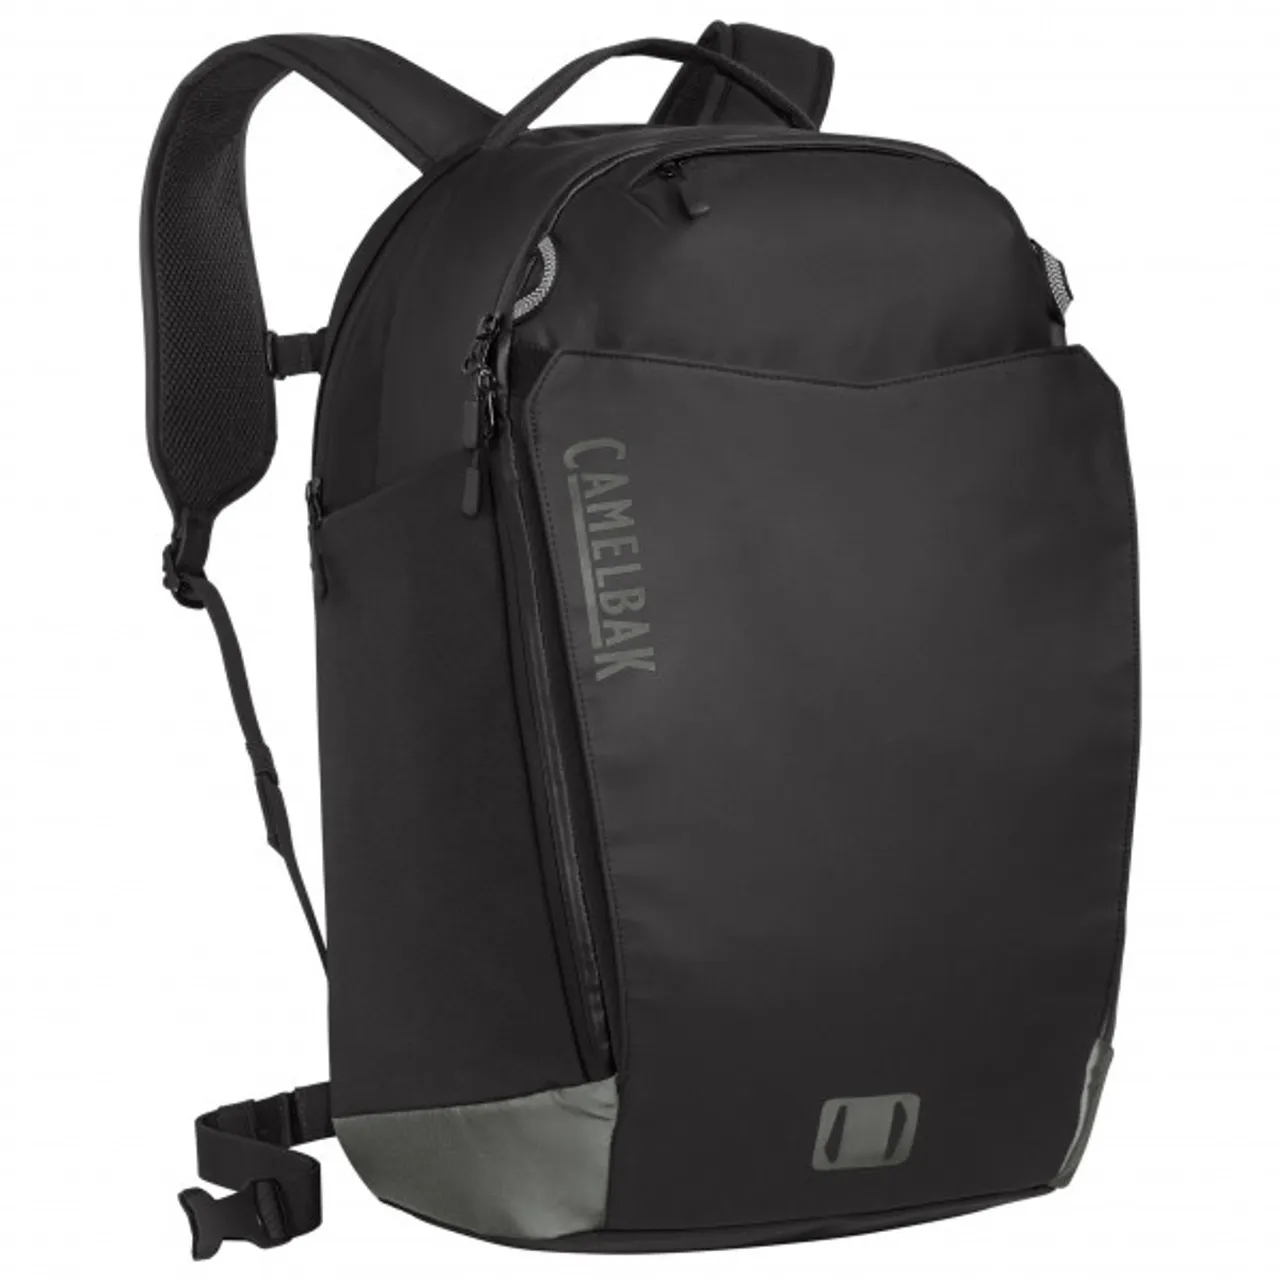 Camelbak - H.A.W.G. Commute 30 - Cycling backpack size 30 l, black/grey